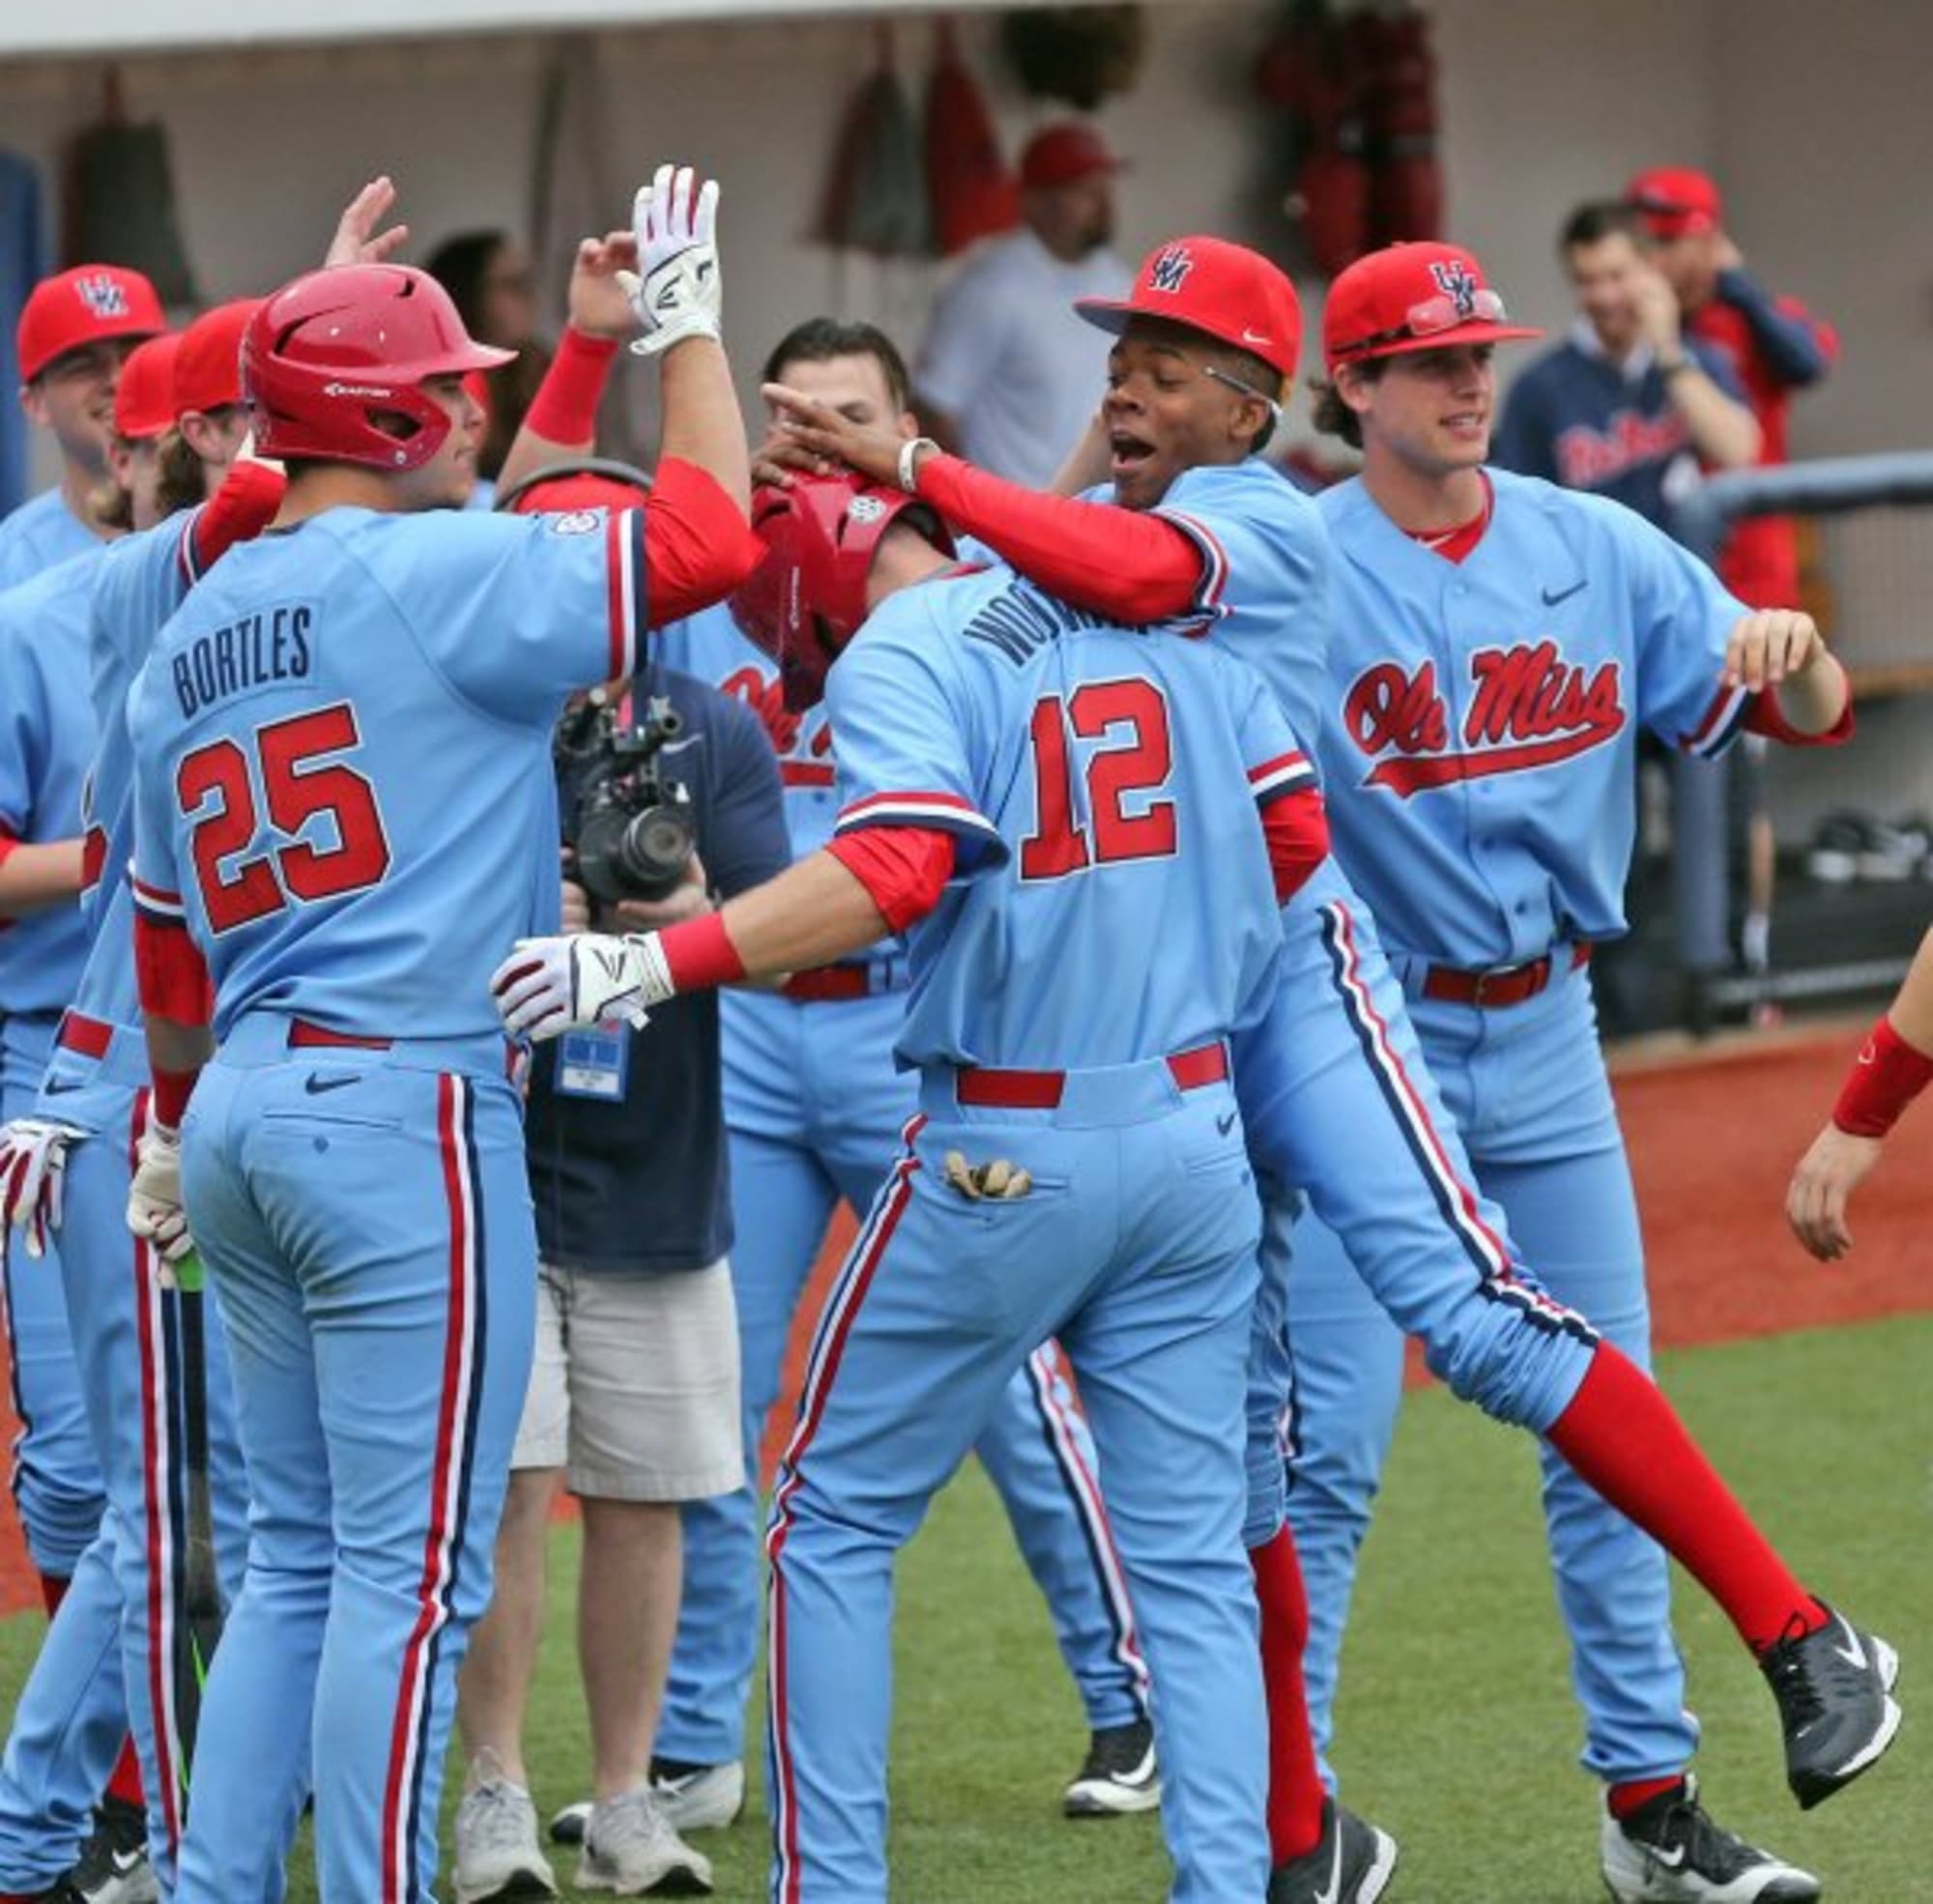 Ole Miss Baseball and Powder Blue uniforms in pictures